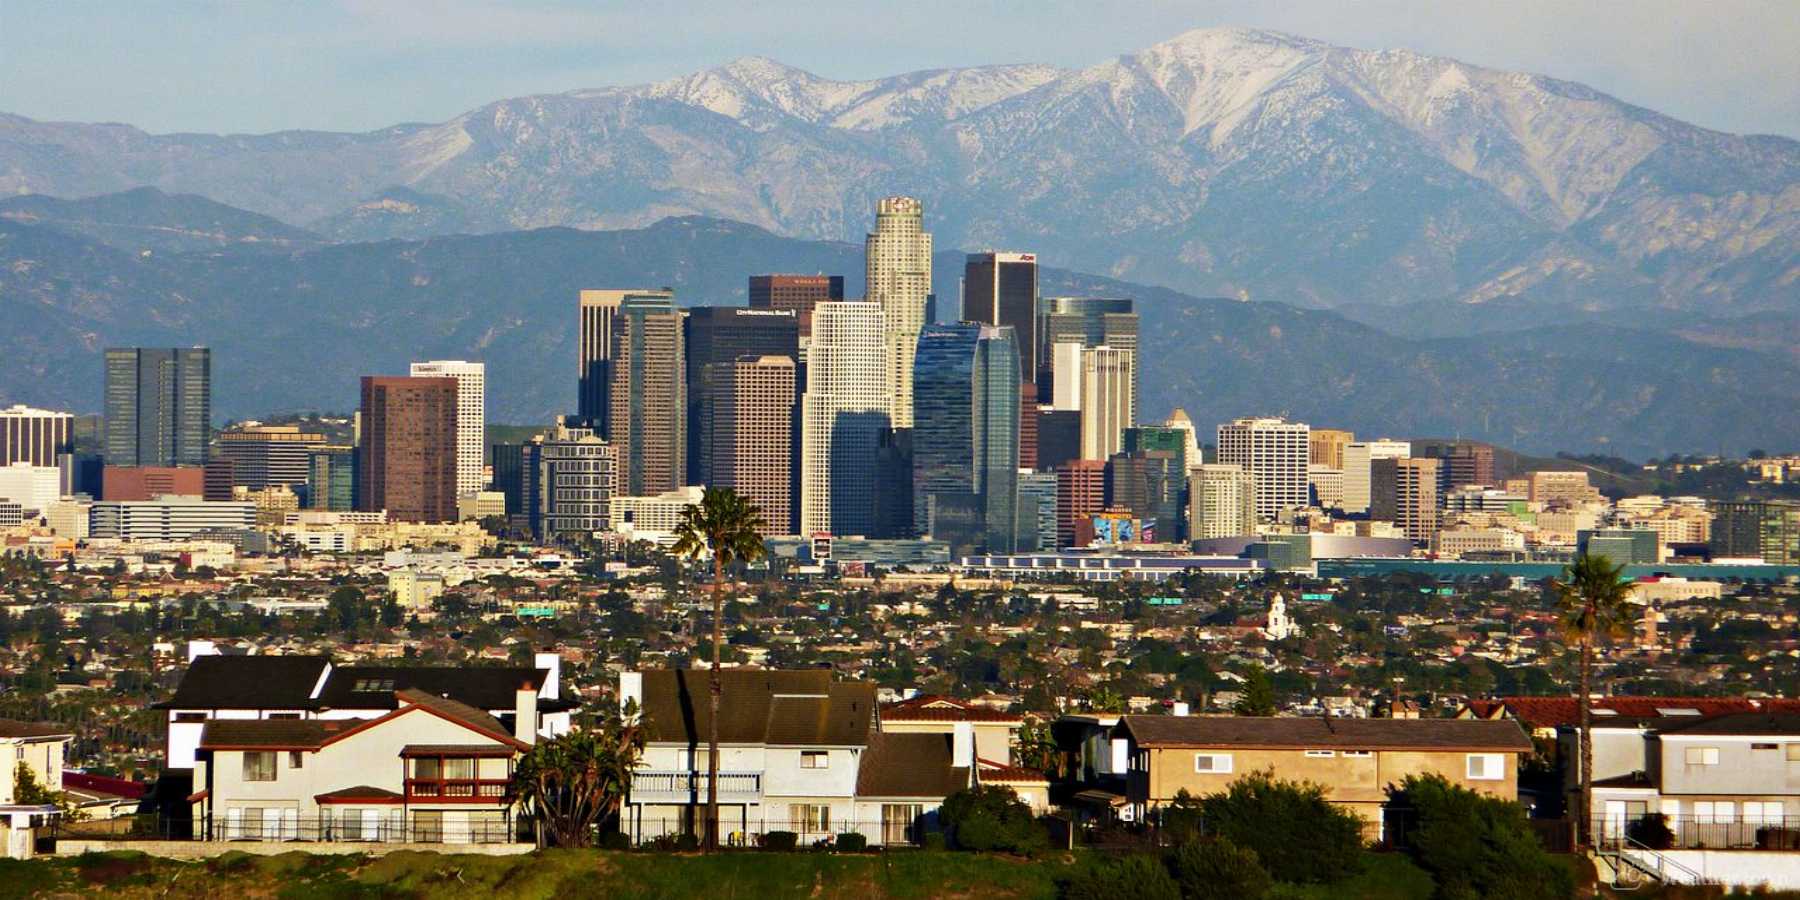 Los Angeles is a large city in the United States of America